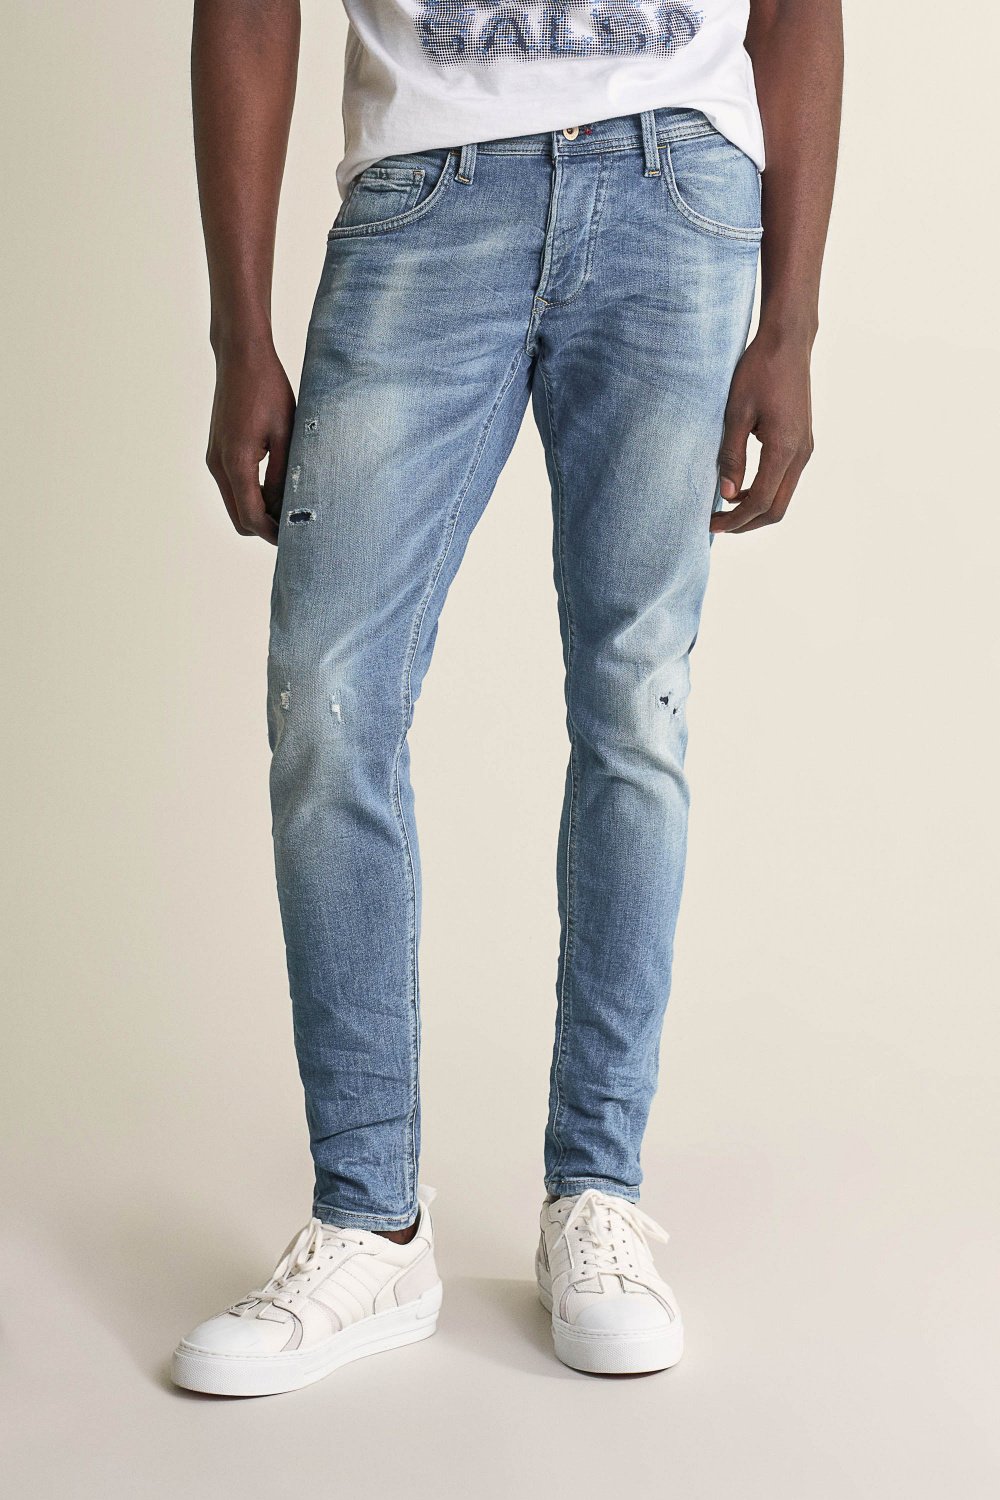 Clash skinny ready to go ripped jeans - Salsa